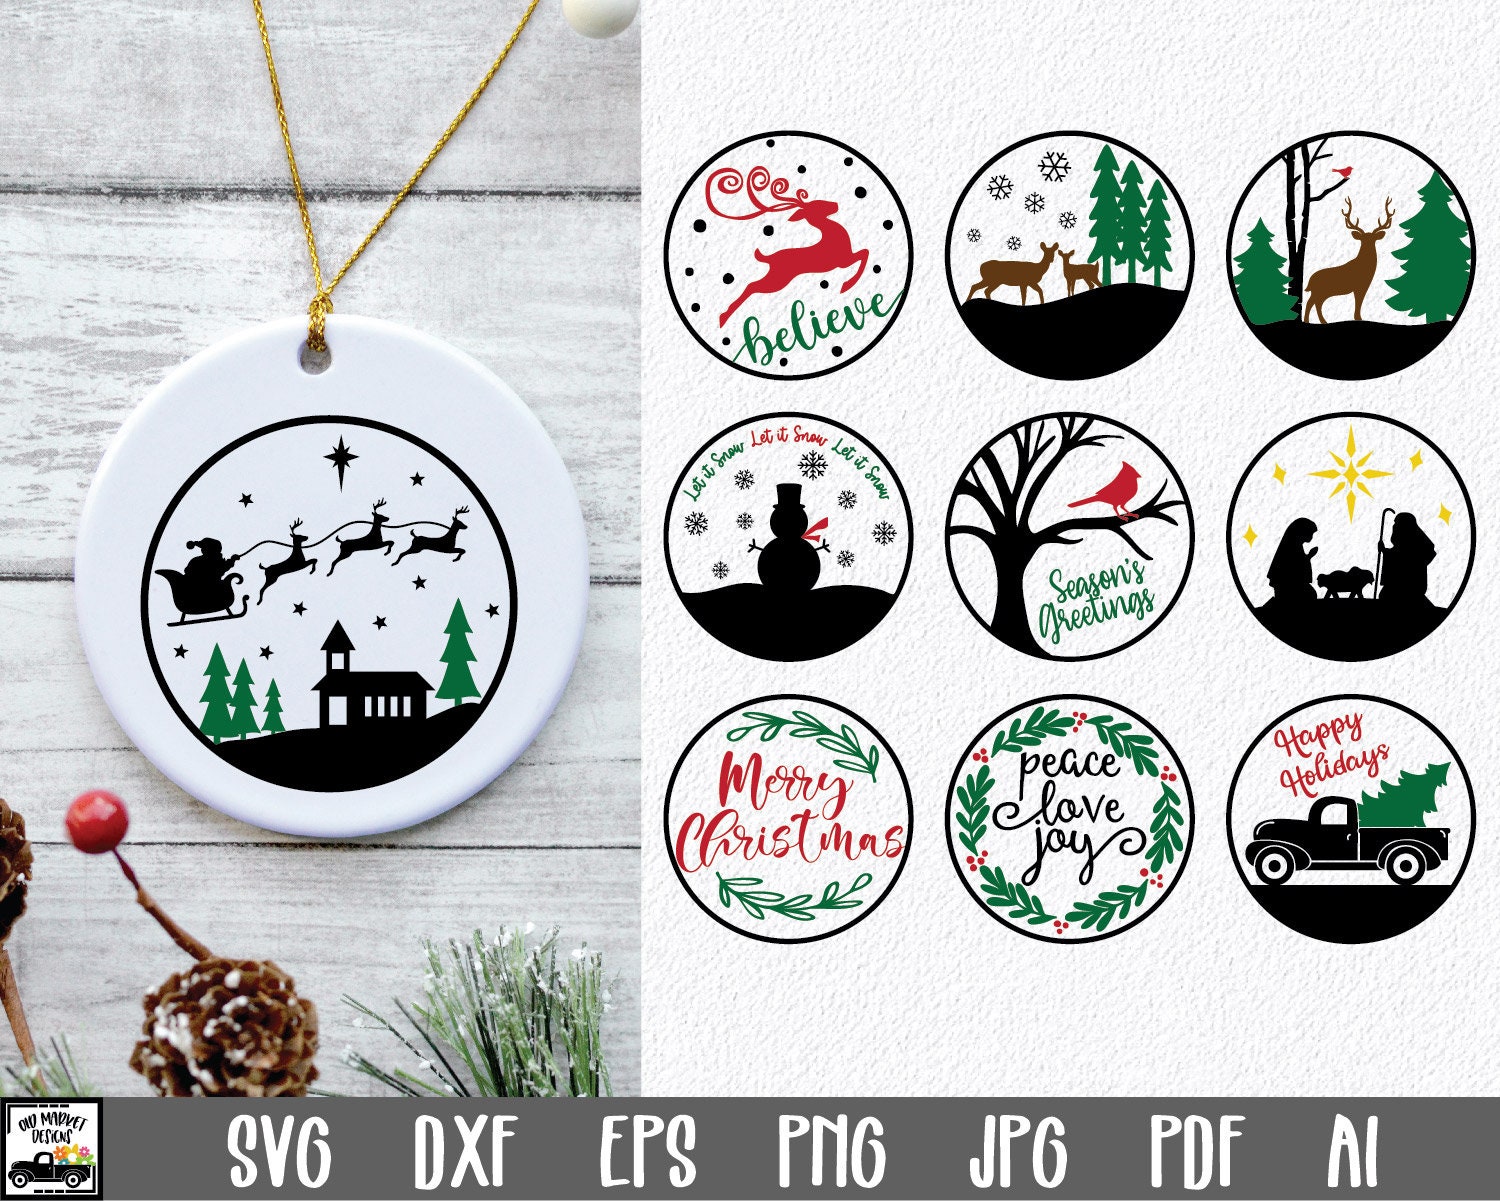 Christmas Ornaments SVG File 10 Christmas SVG Files Round | Etsy